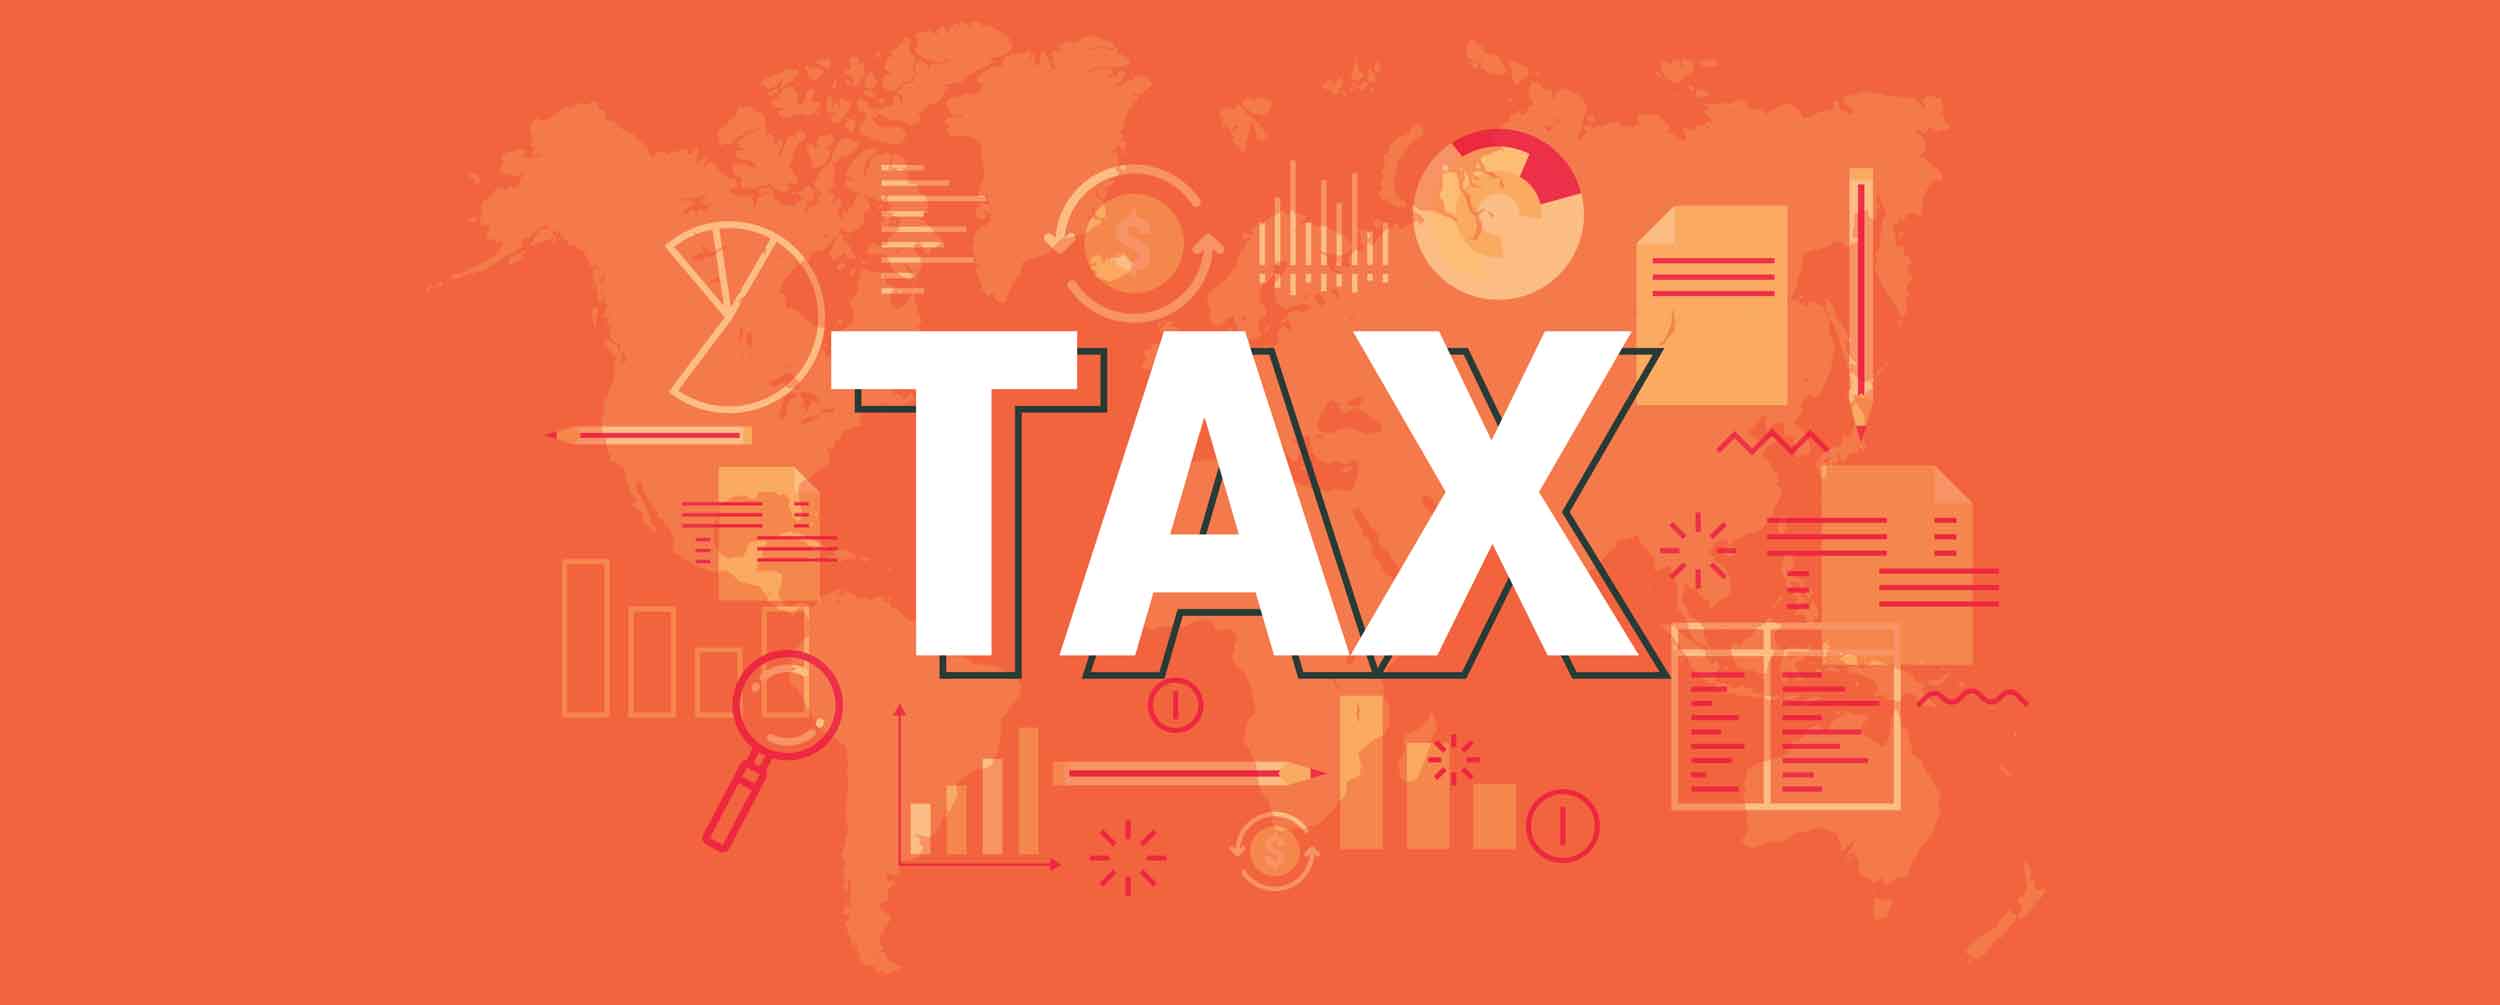 Mobile image Orange graphic with the word Tax in white with financial icons in the background